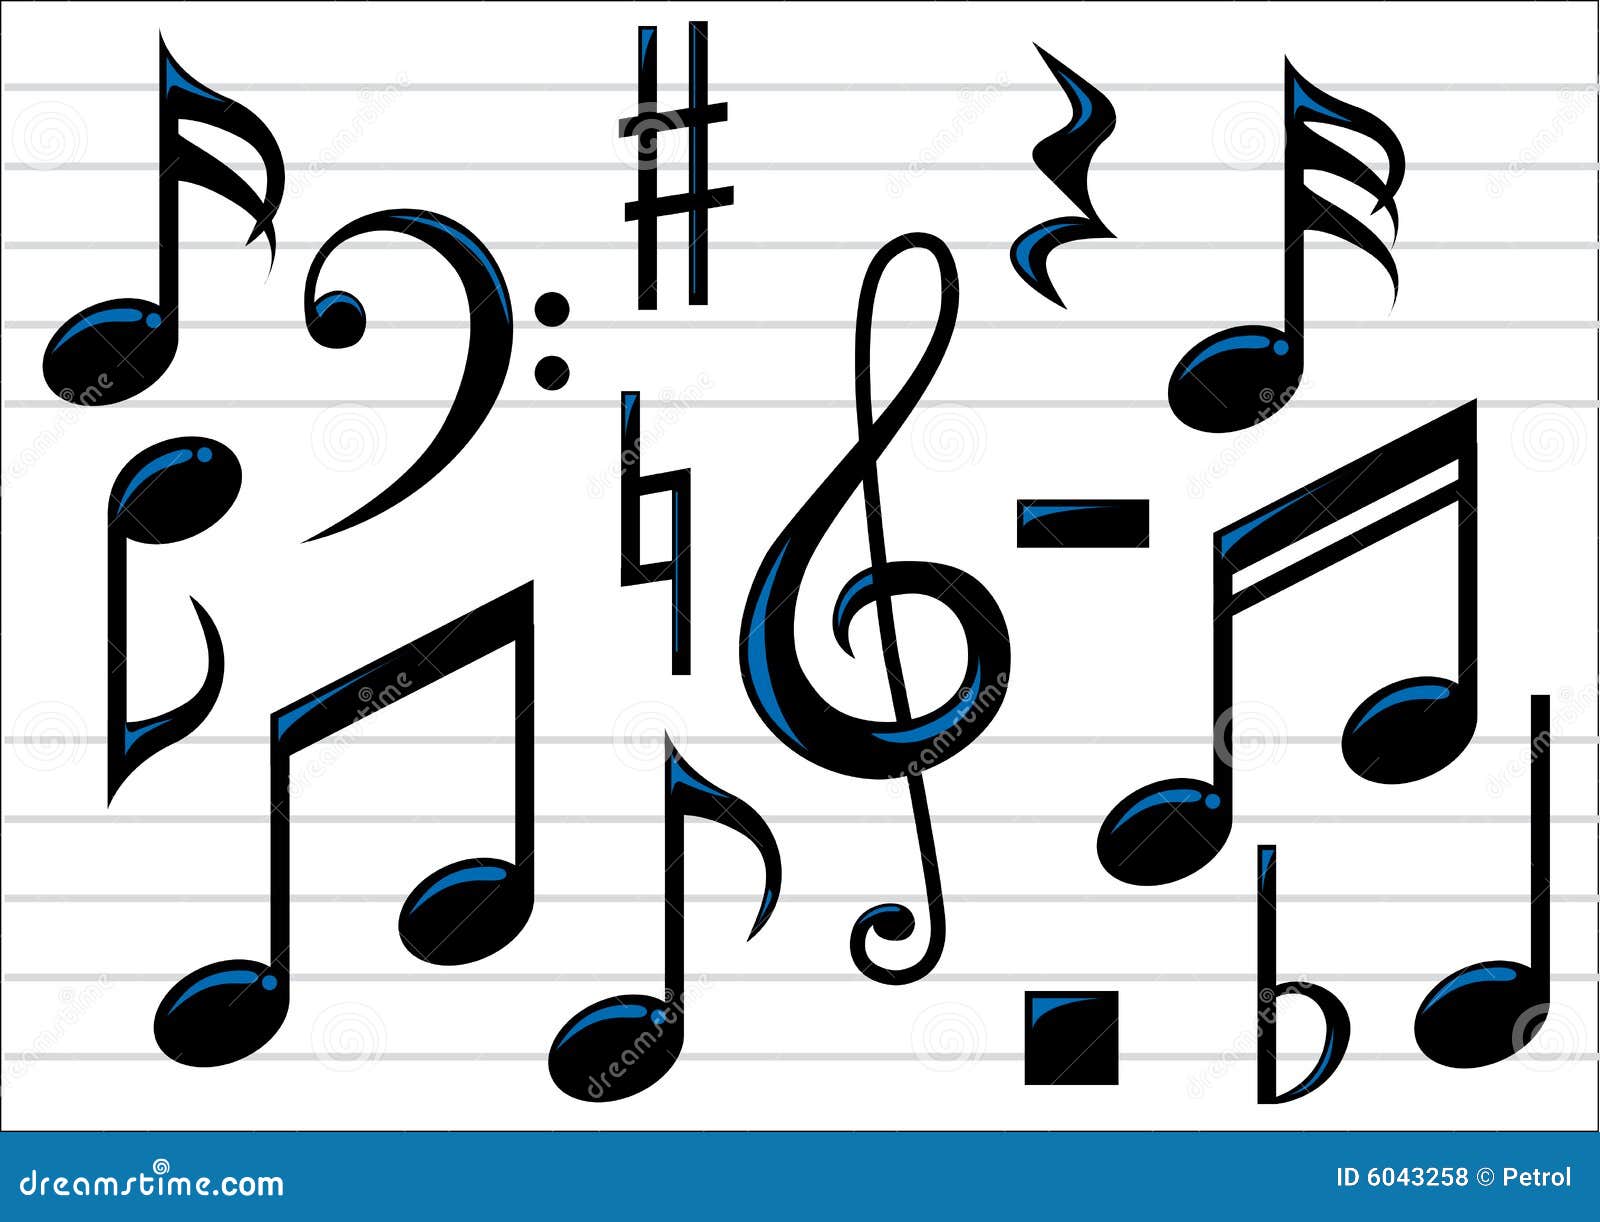 vector free download music notes - photo #10